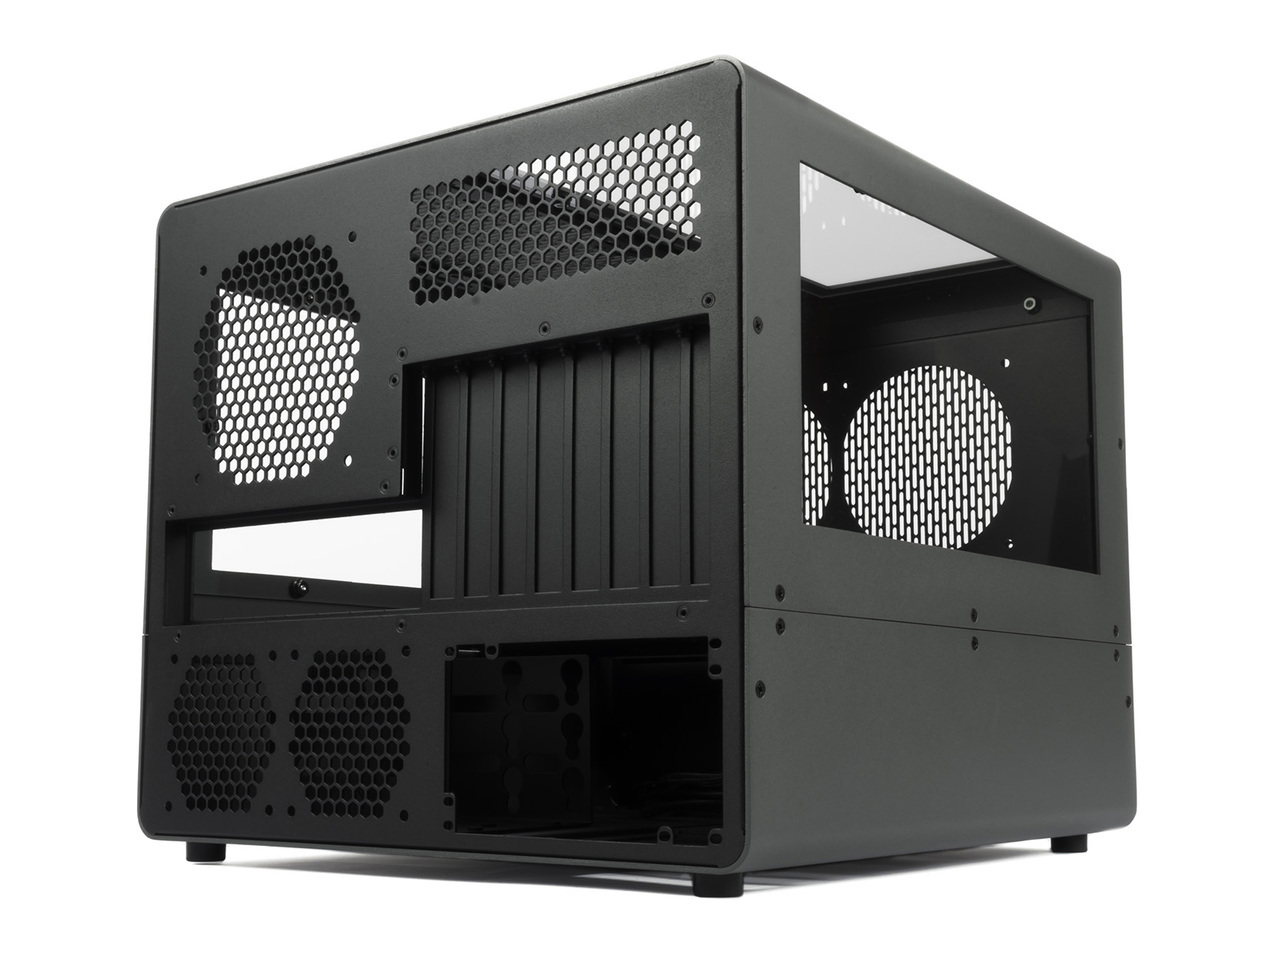 CaseLabs Bullet BH8 Case Launched - ExtremeRigs.net